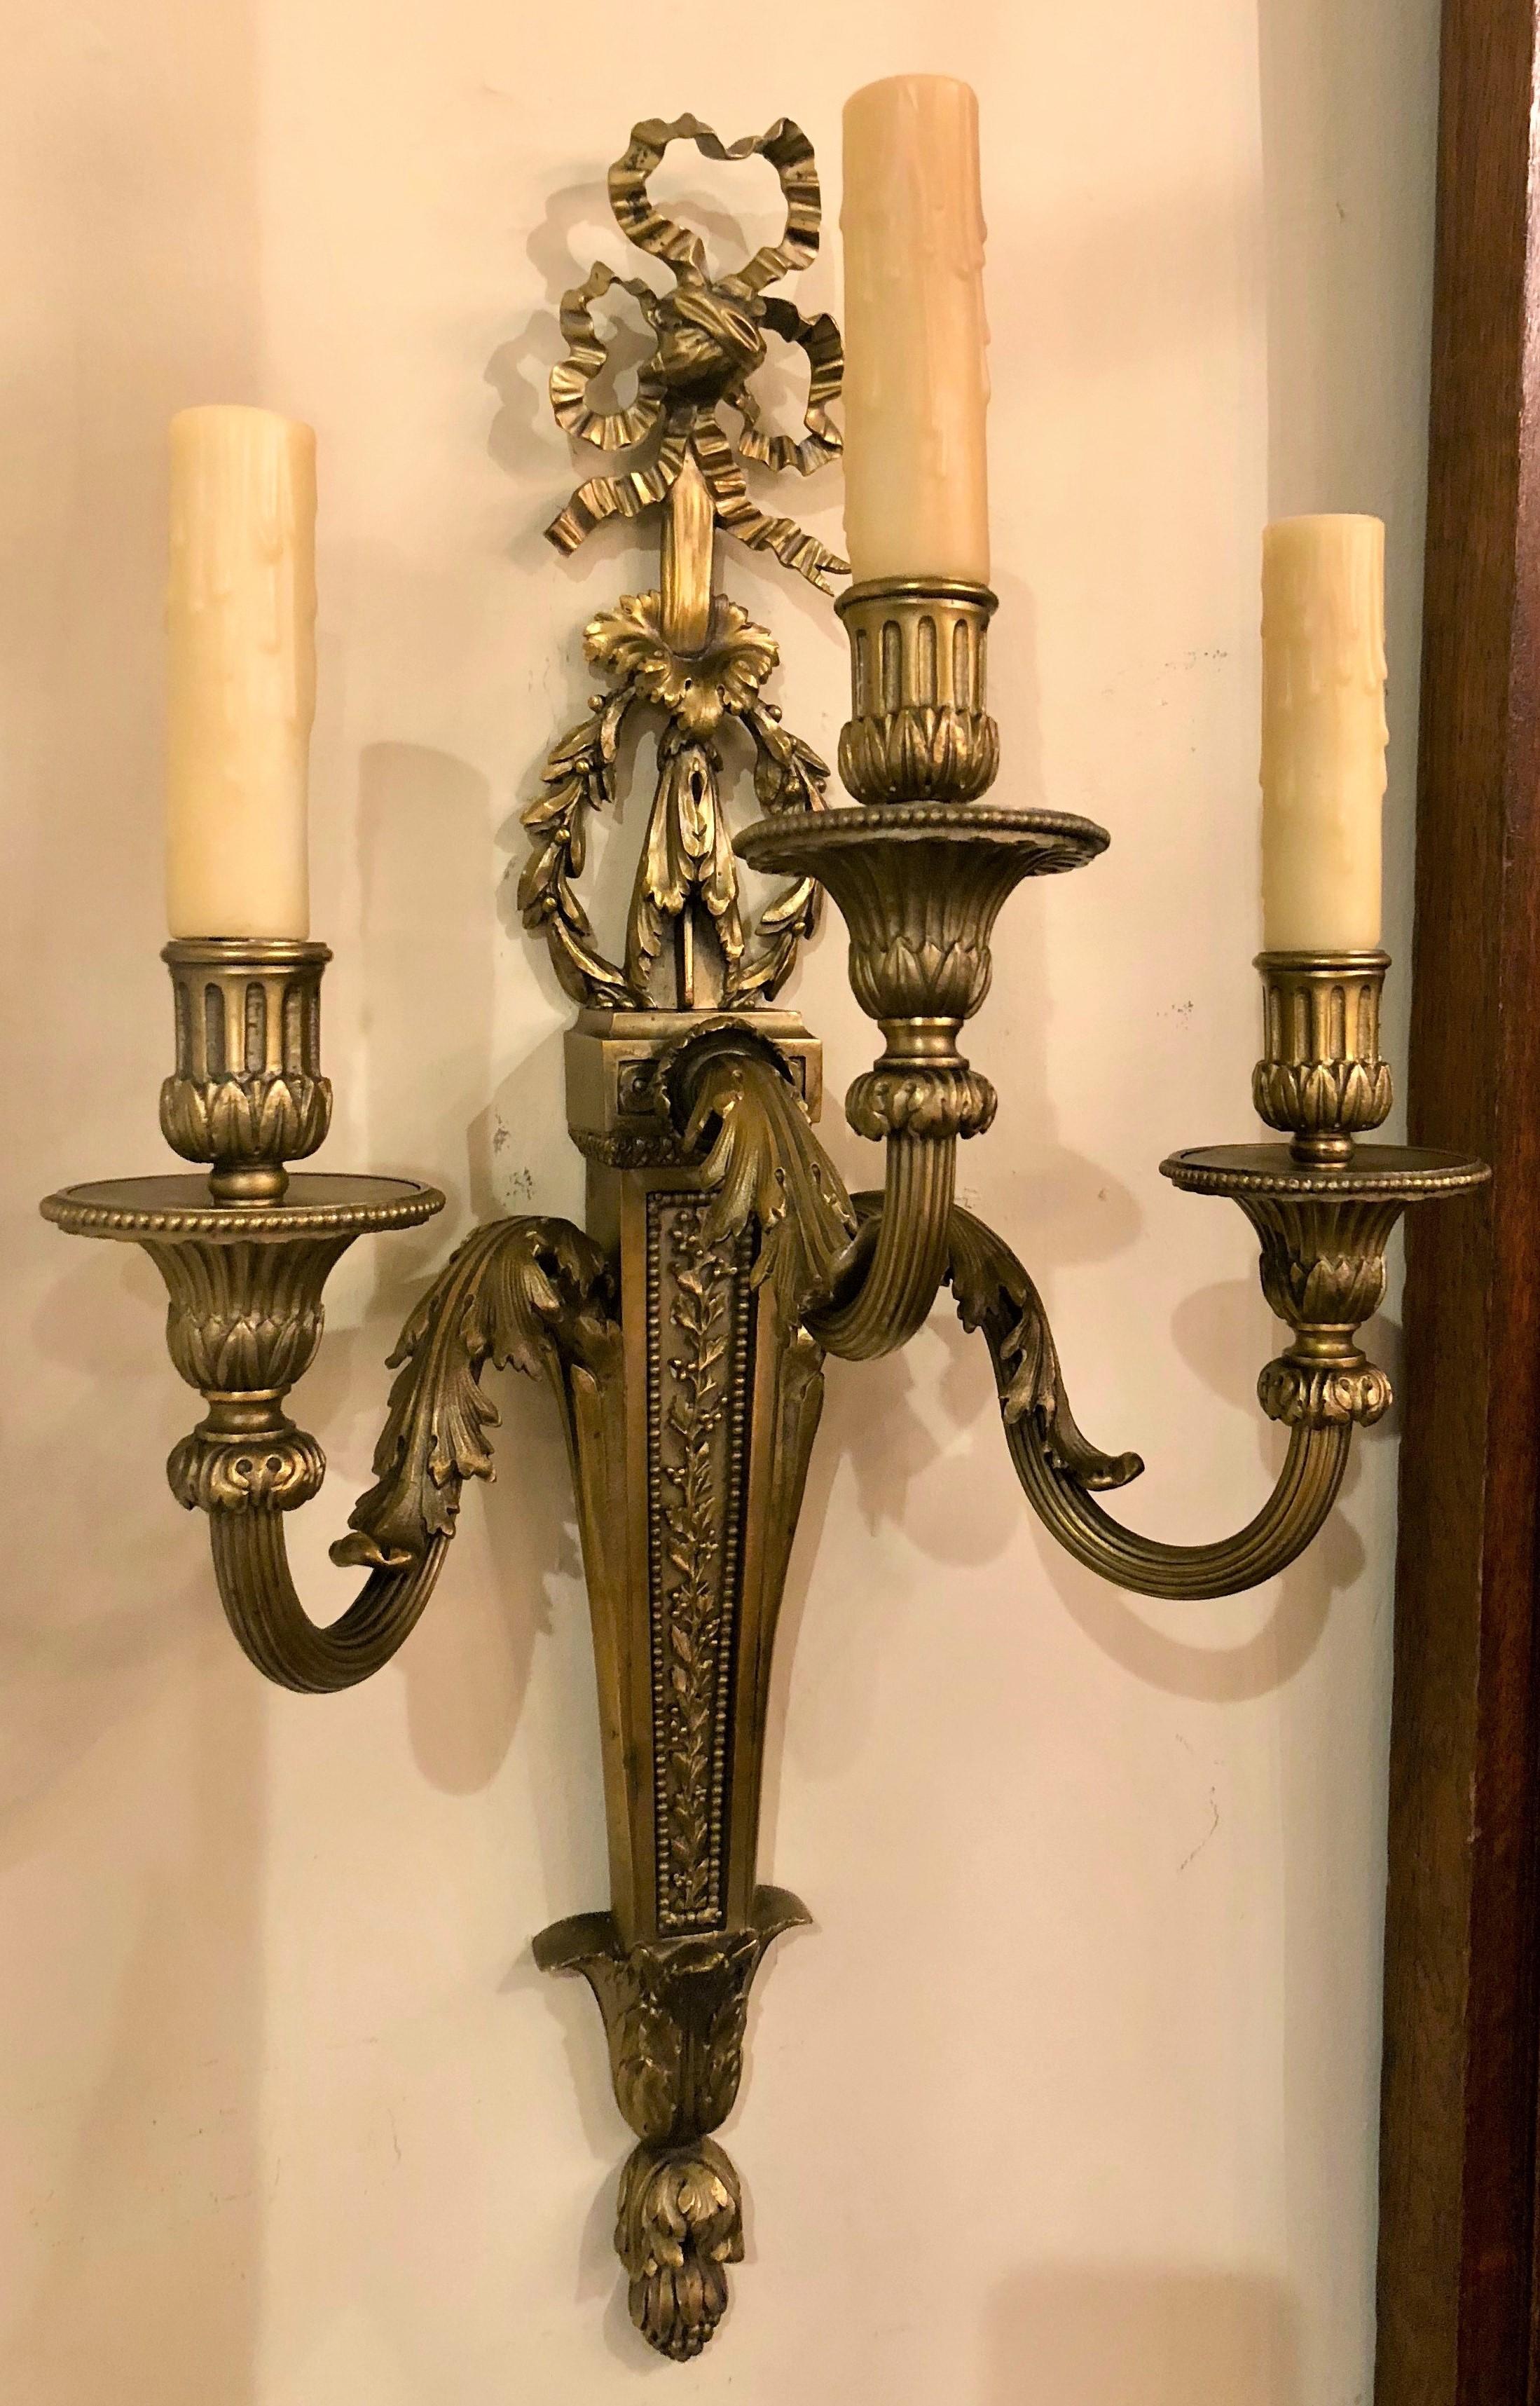 These sconces have been rewired and are ready to grace your walls with their three-light glow.